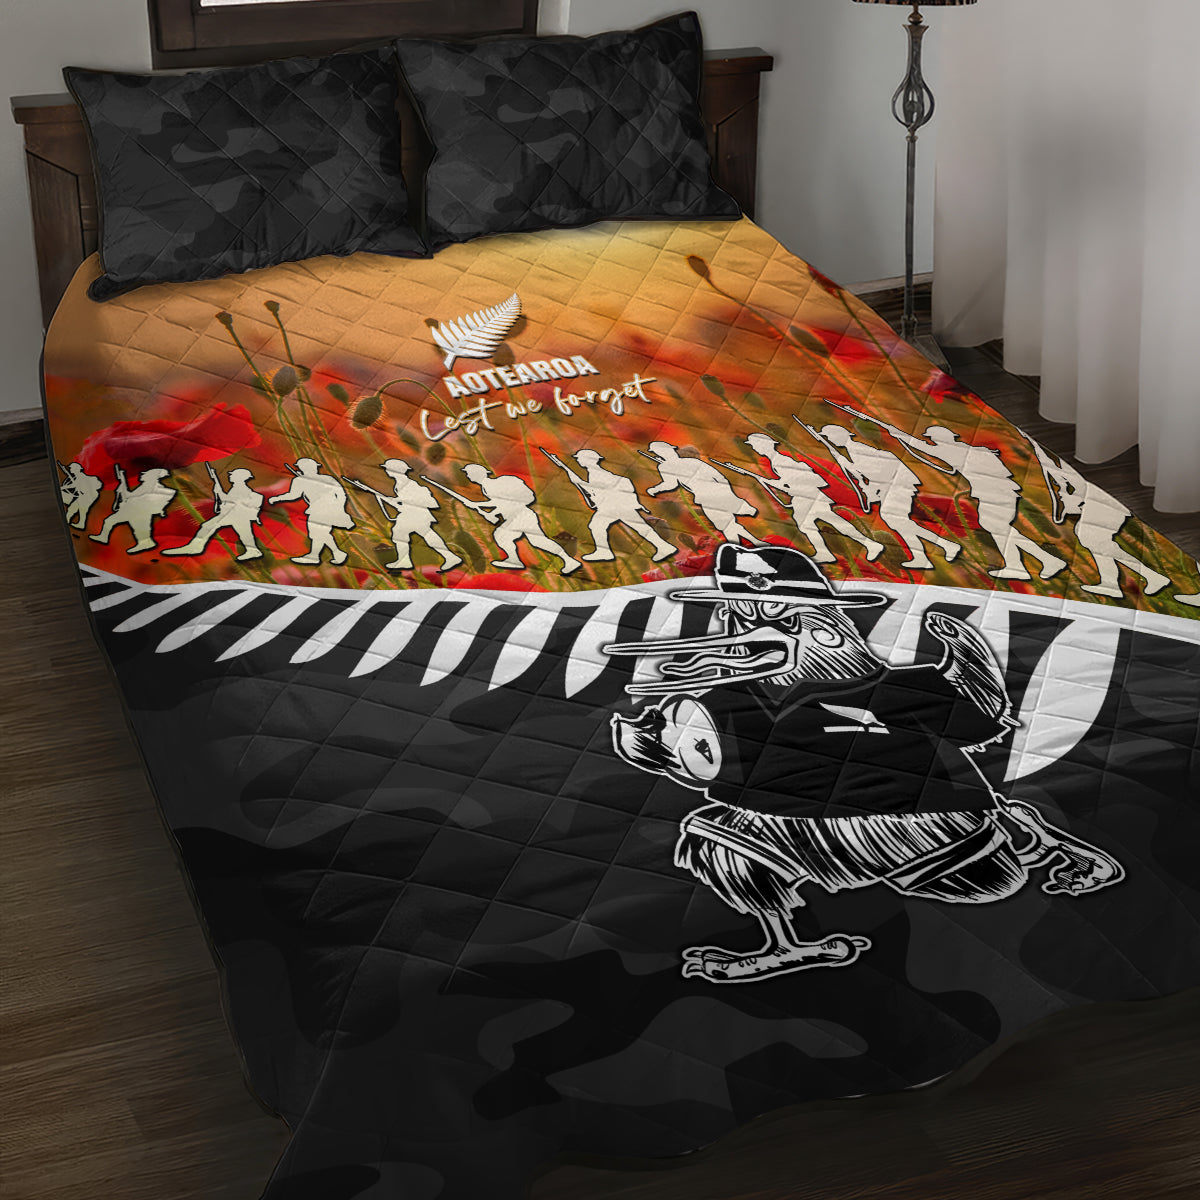 New Zealand ANZAC Rugby Quilt Bed Set Soldier Fern With Kiwi Bird